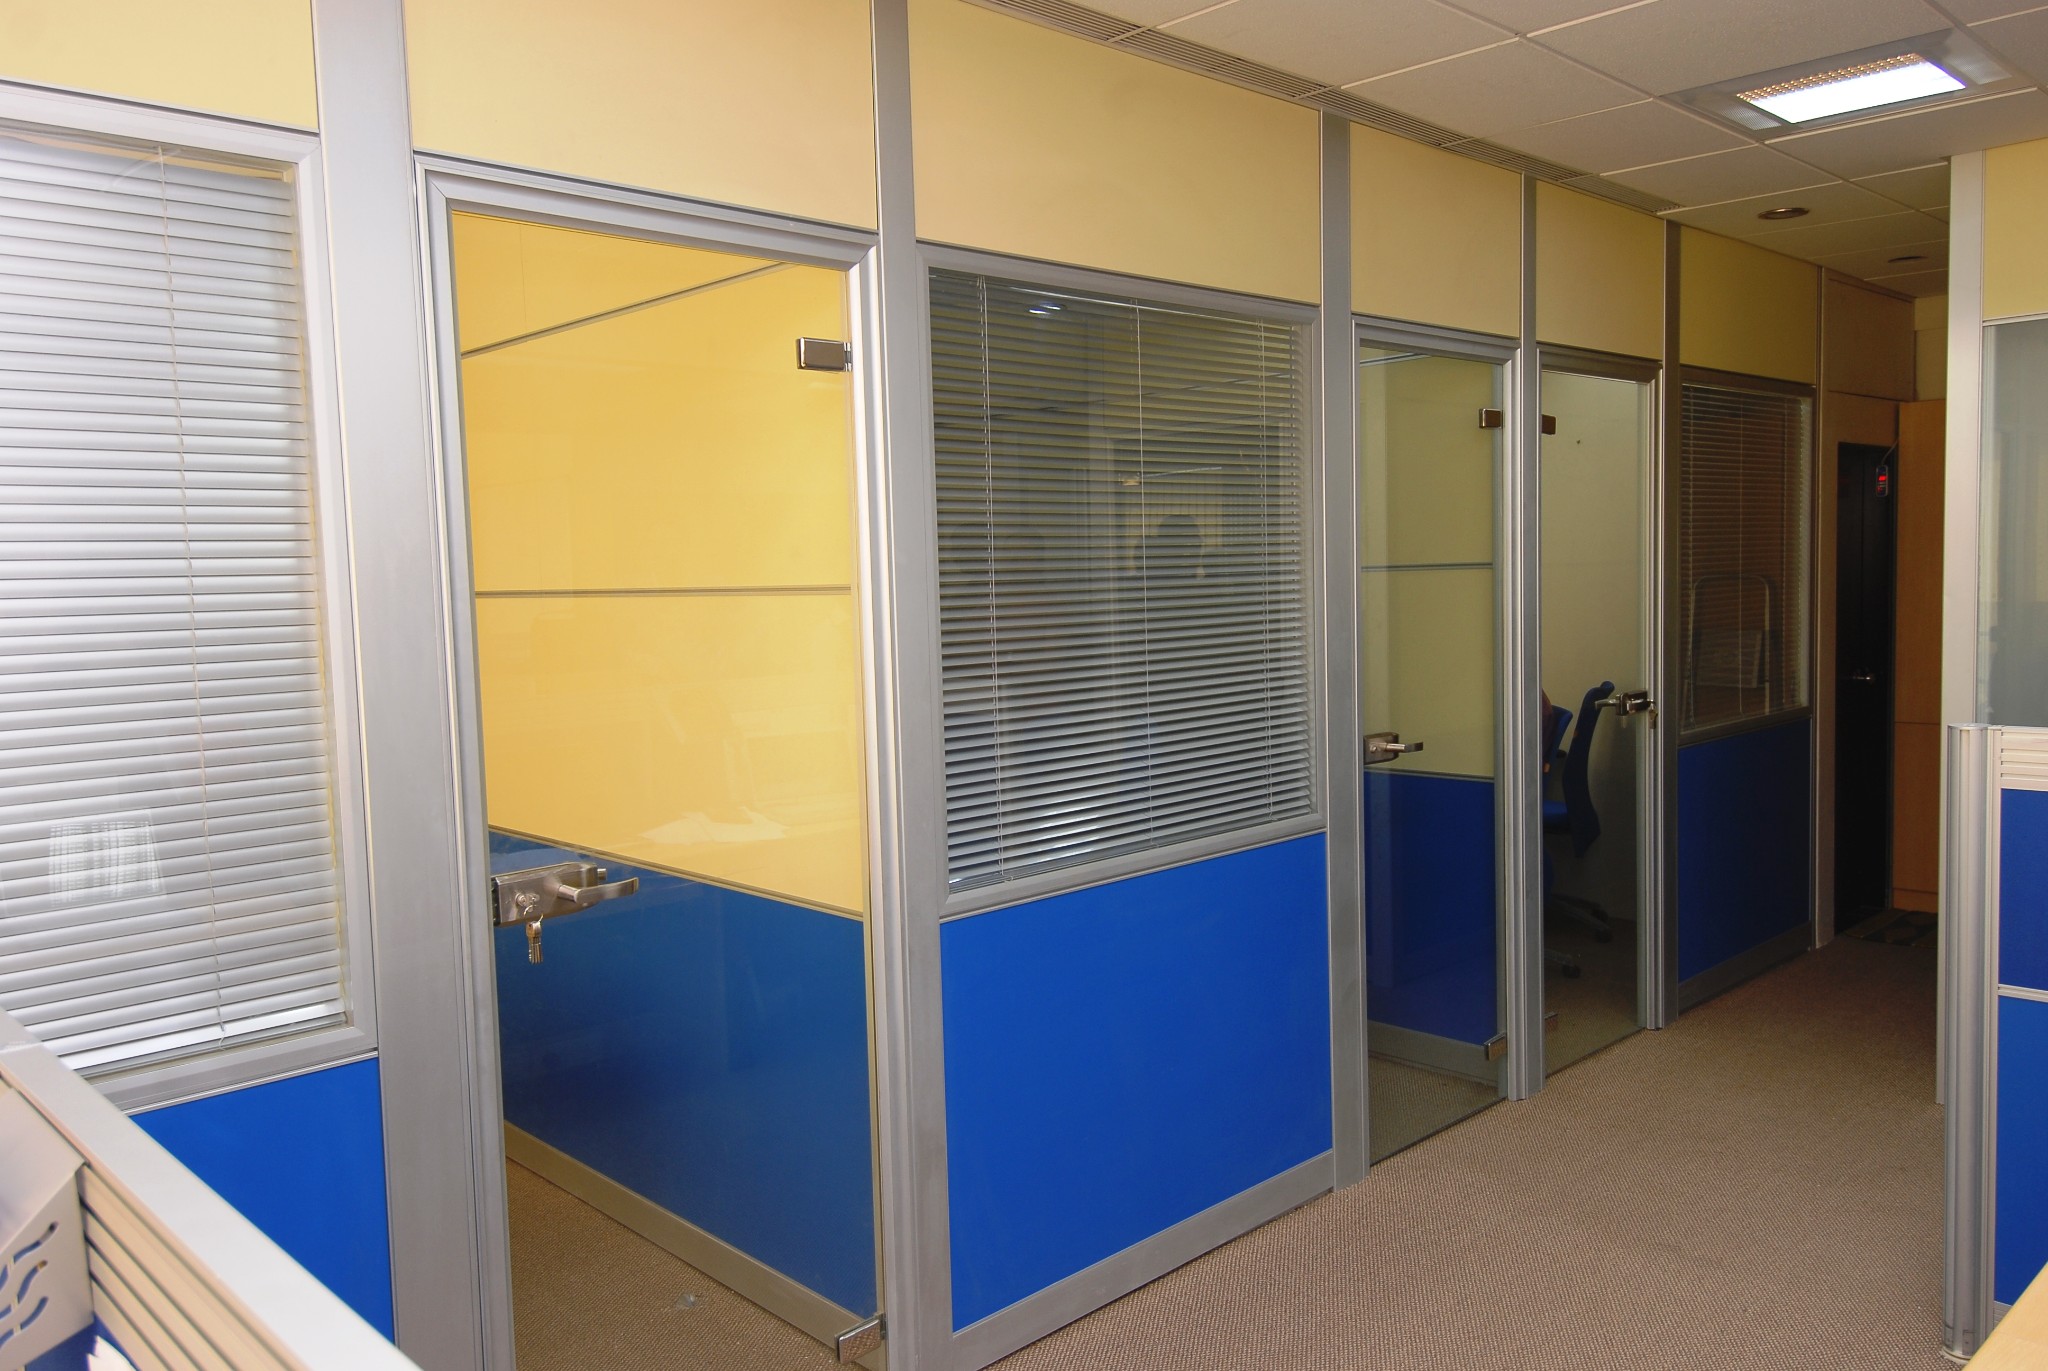 010 workstation cabin available For rent sector